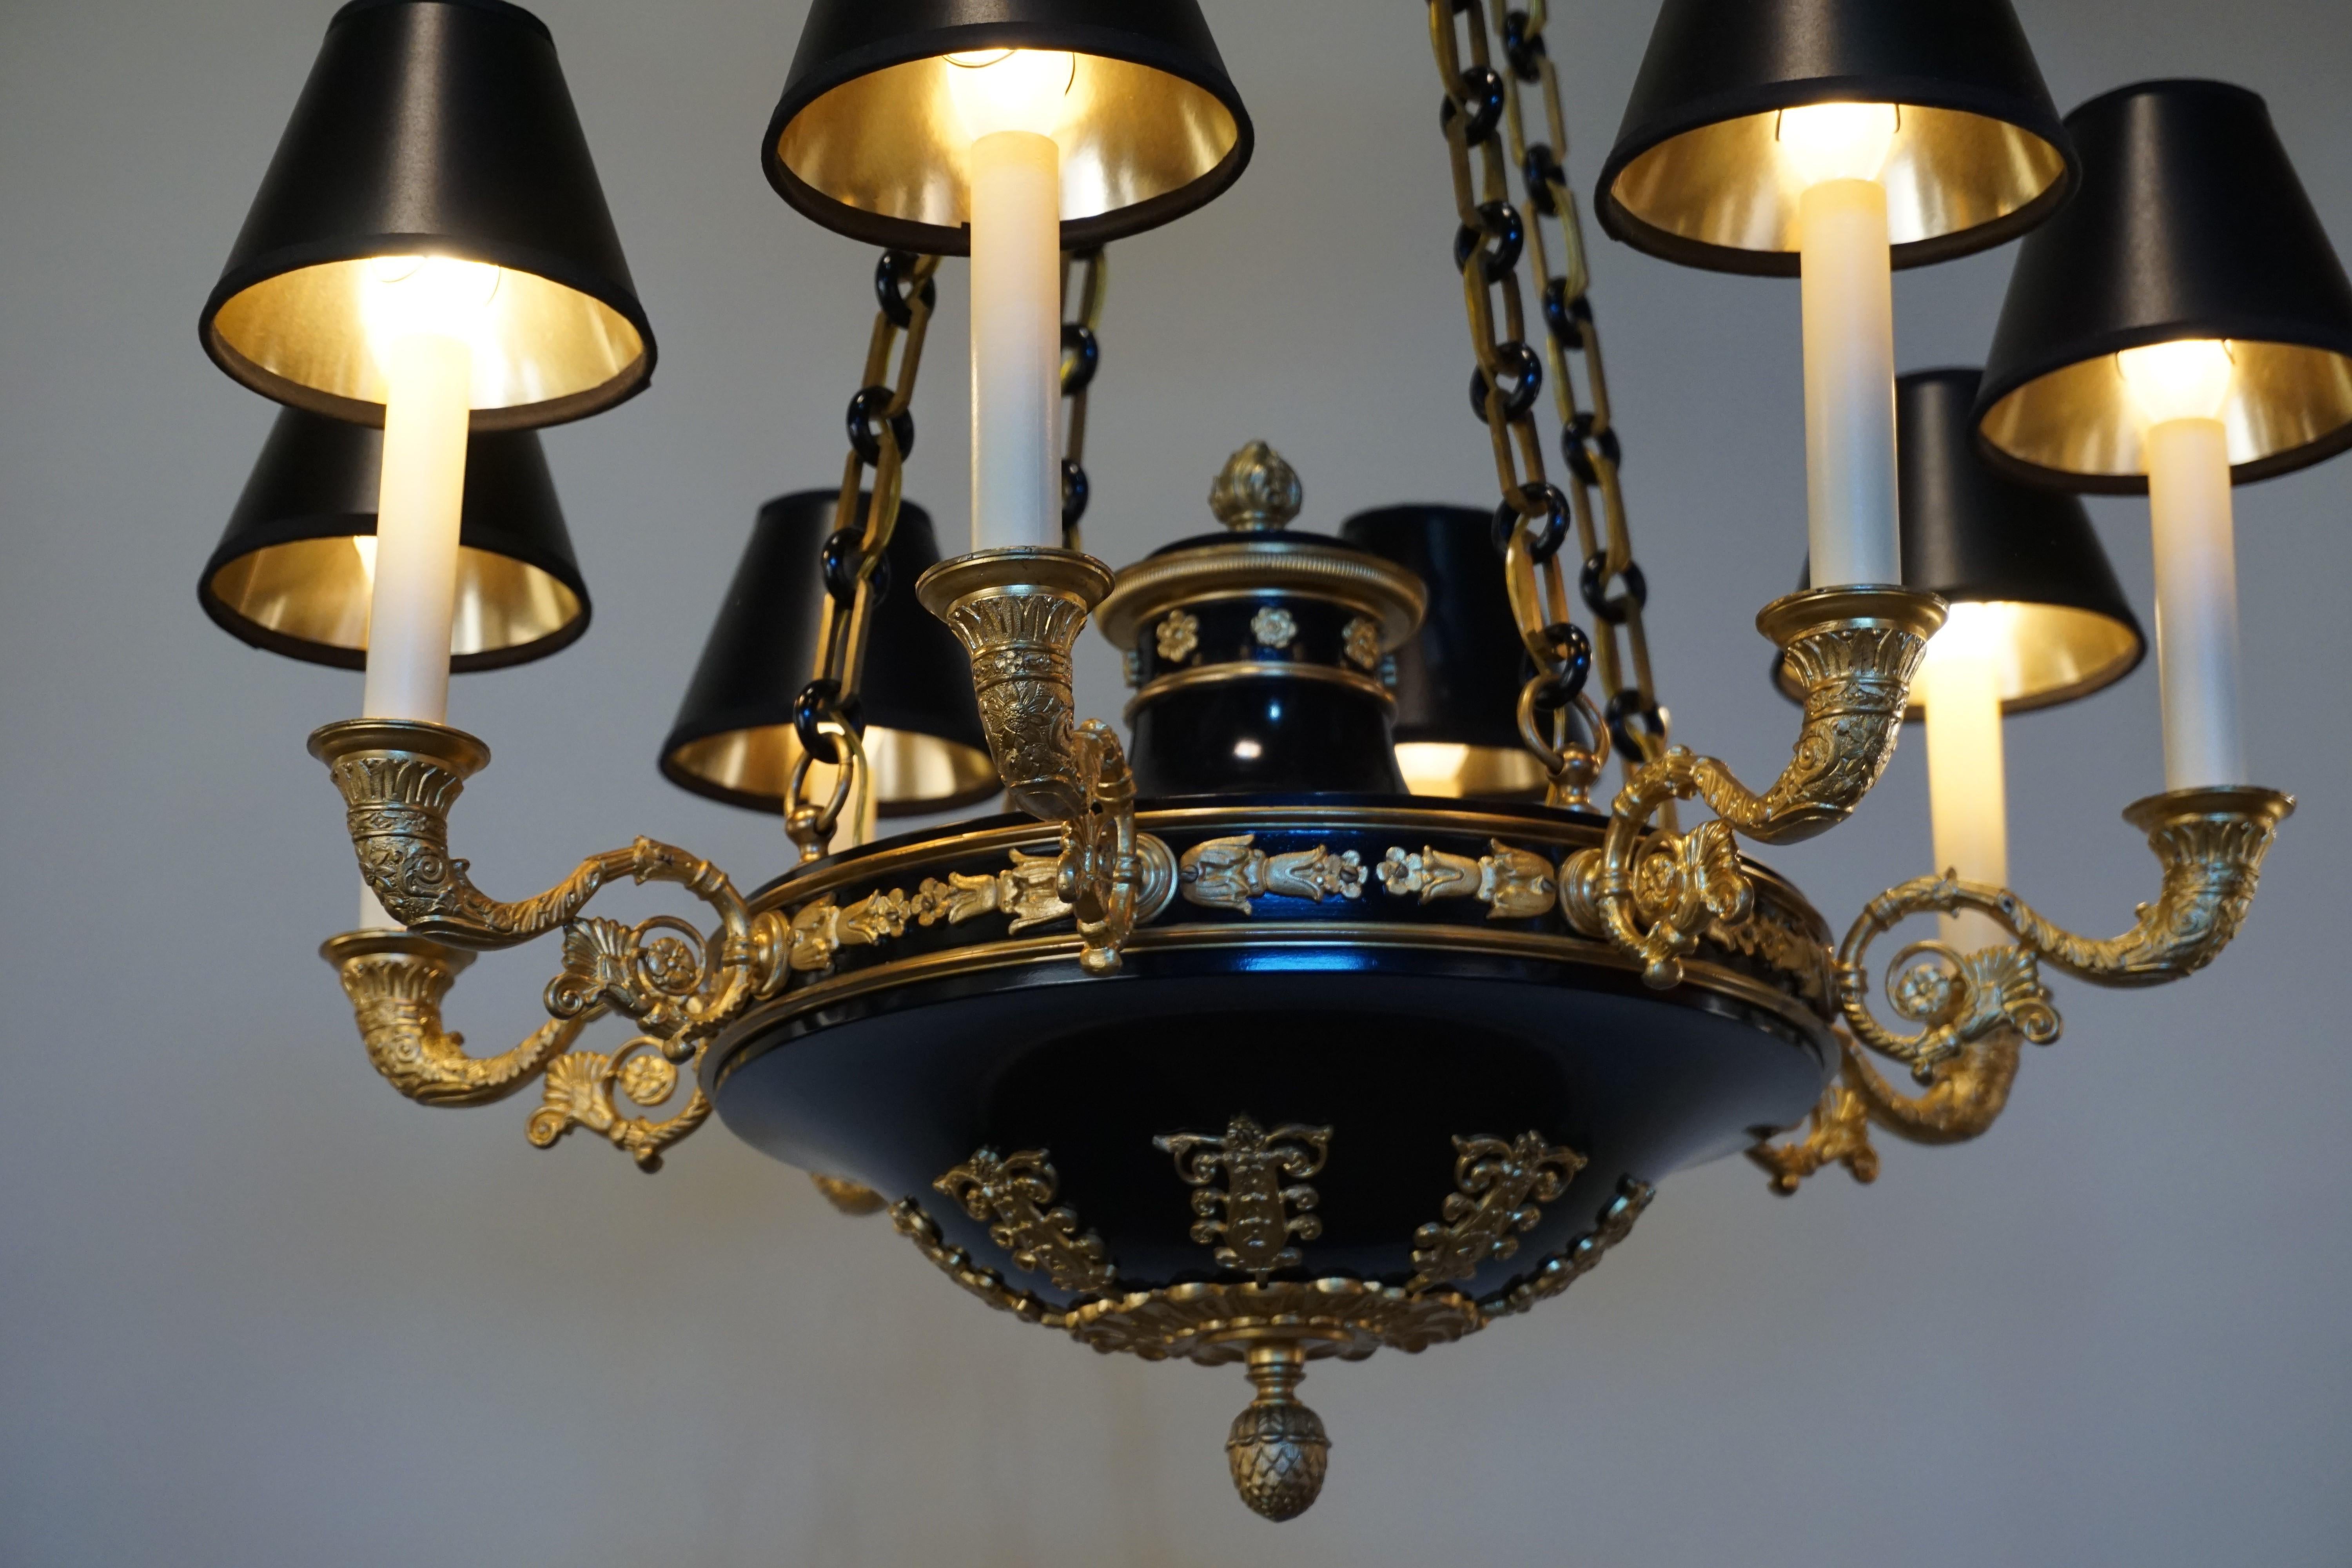 Made in France during 1930s. A truly beautiful eight-light French Empire bronze chandelier.
This chandelier can be fully installed with 34